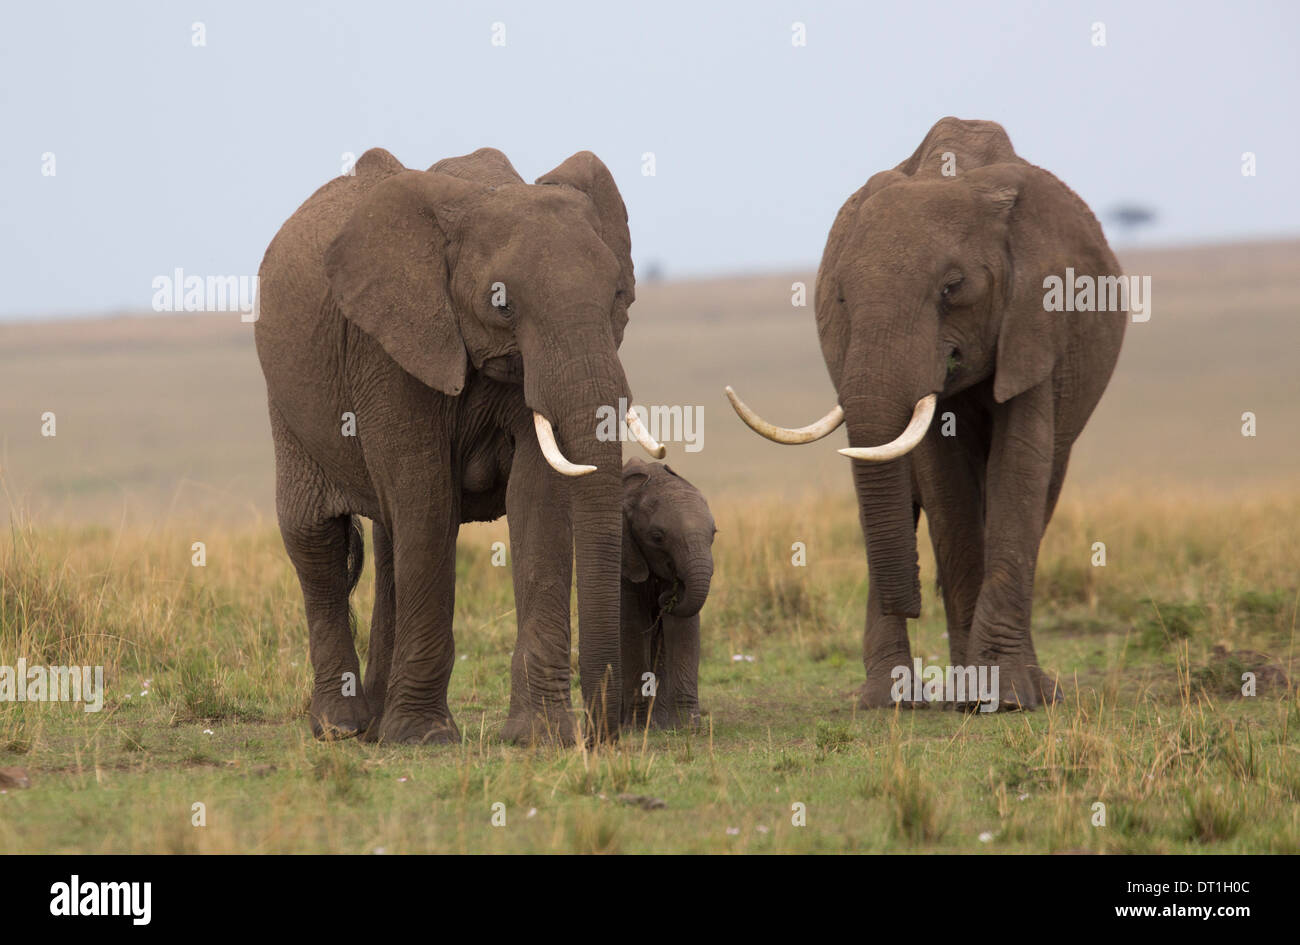 Two adult Elephants protecting young elephant calf in Kenya Masai Mara Game Reserve, Africa Stock Photo